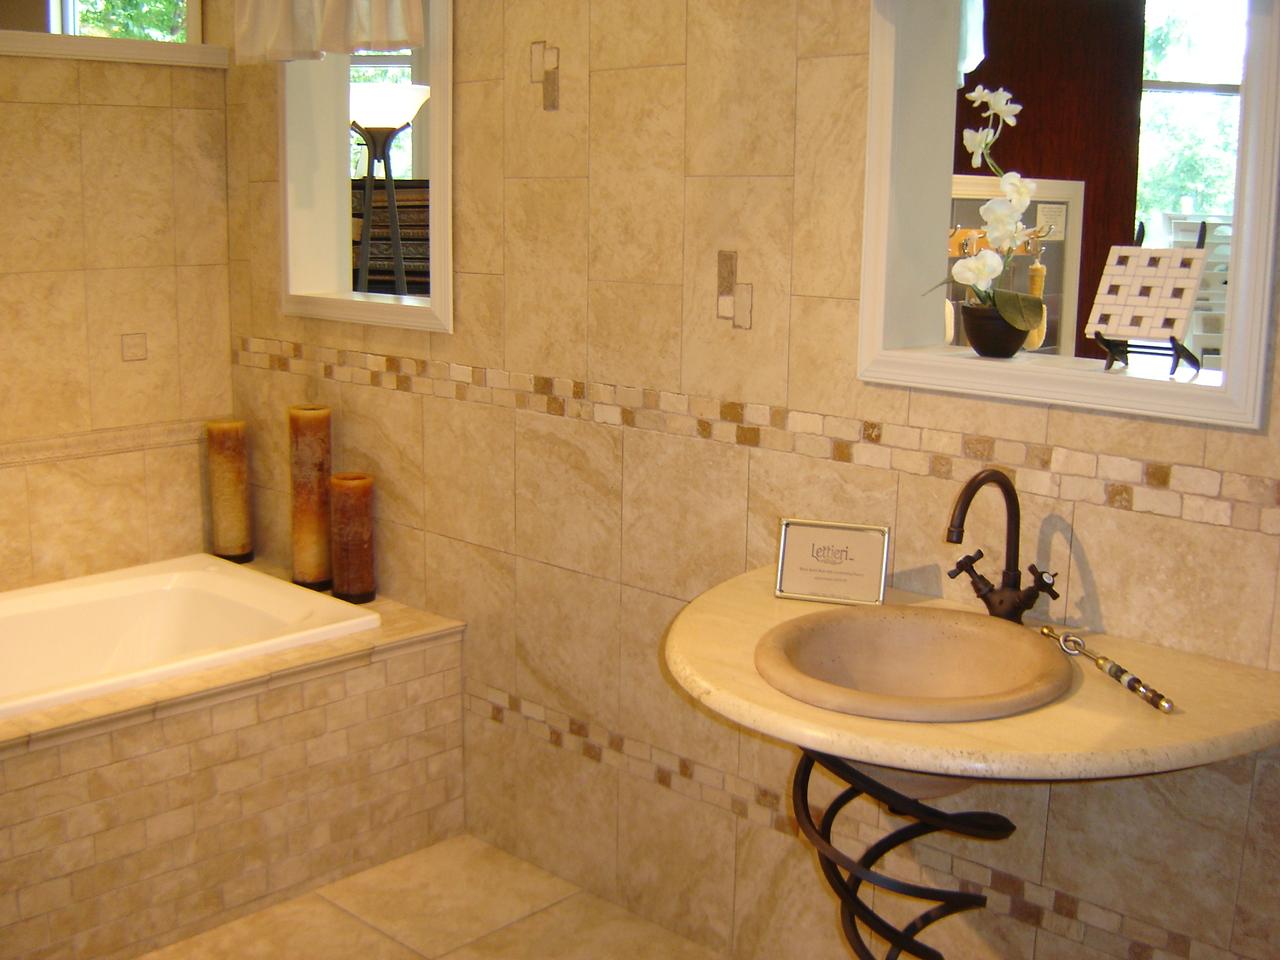 Bathroom remodel ideas with glass tile